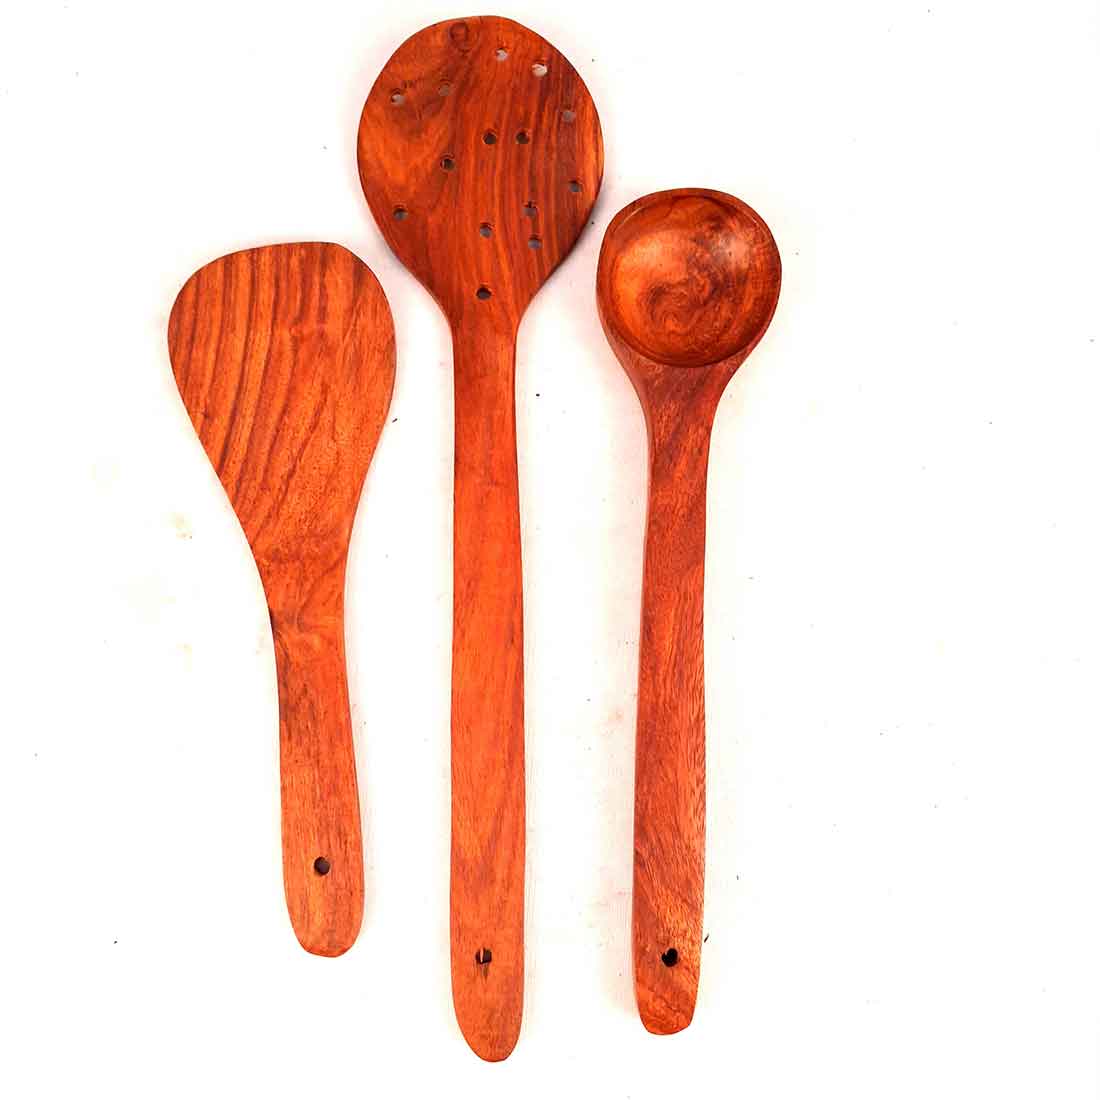 Wooden Spoons - For Non-stick Cookware Cooking & Serving - 15 Inch - Set of  3 - ApkaMart